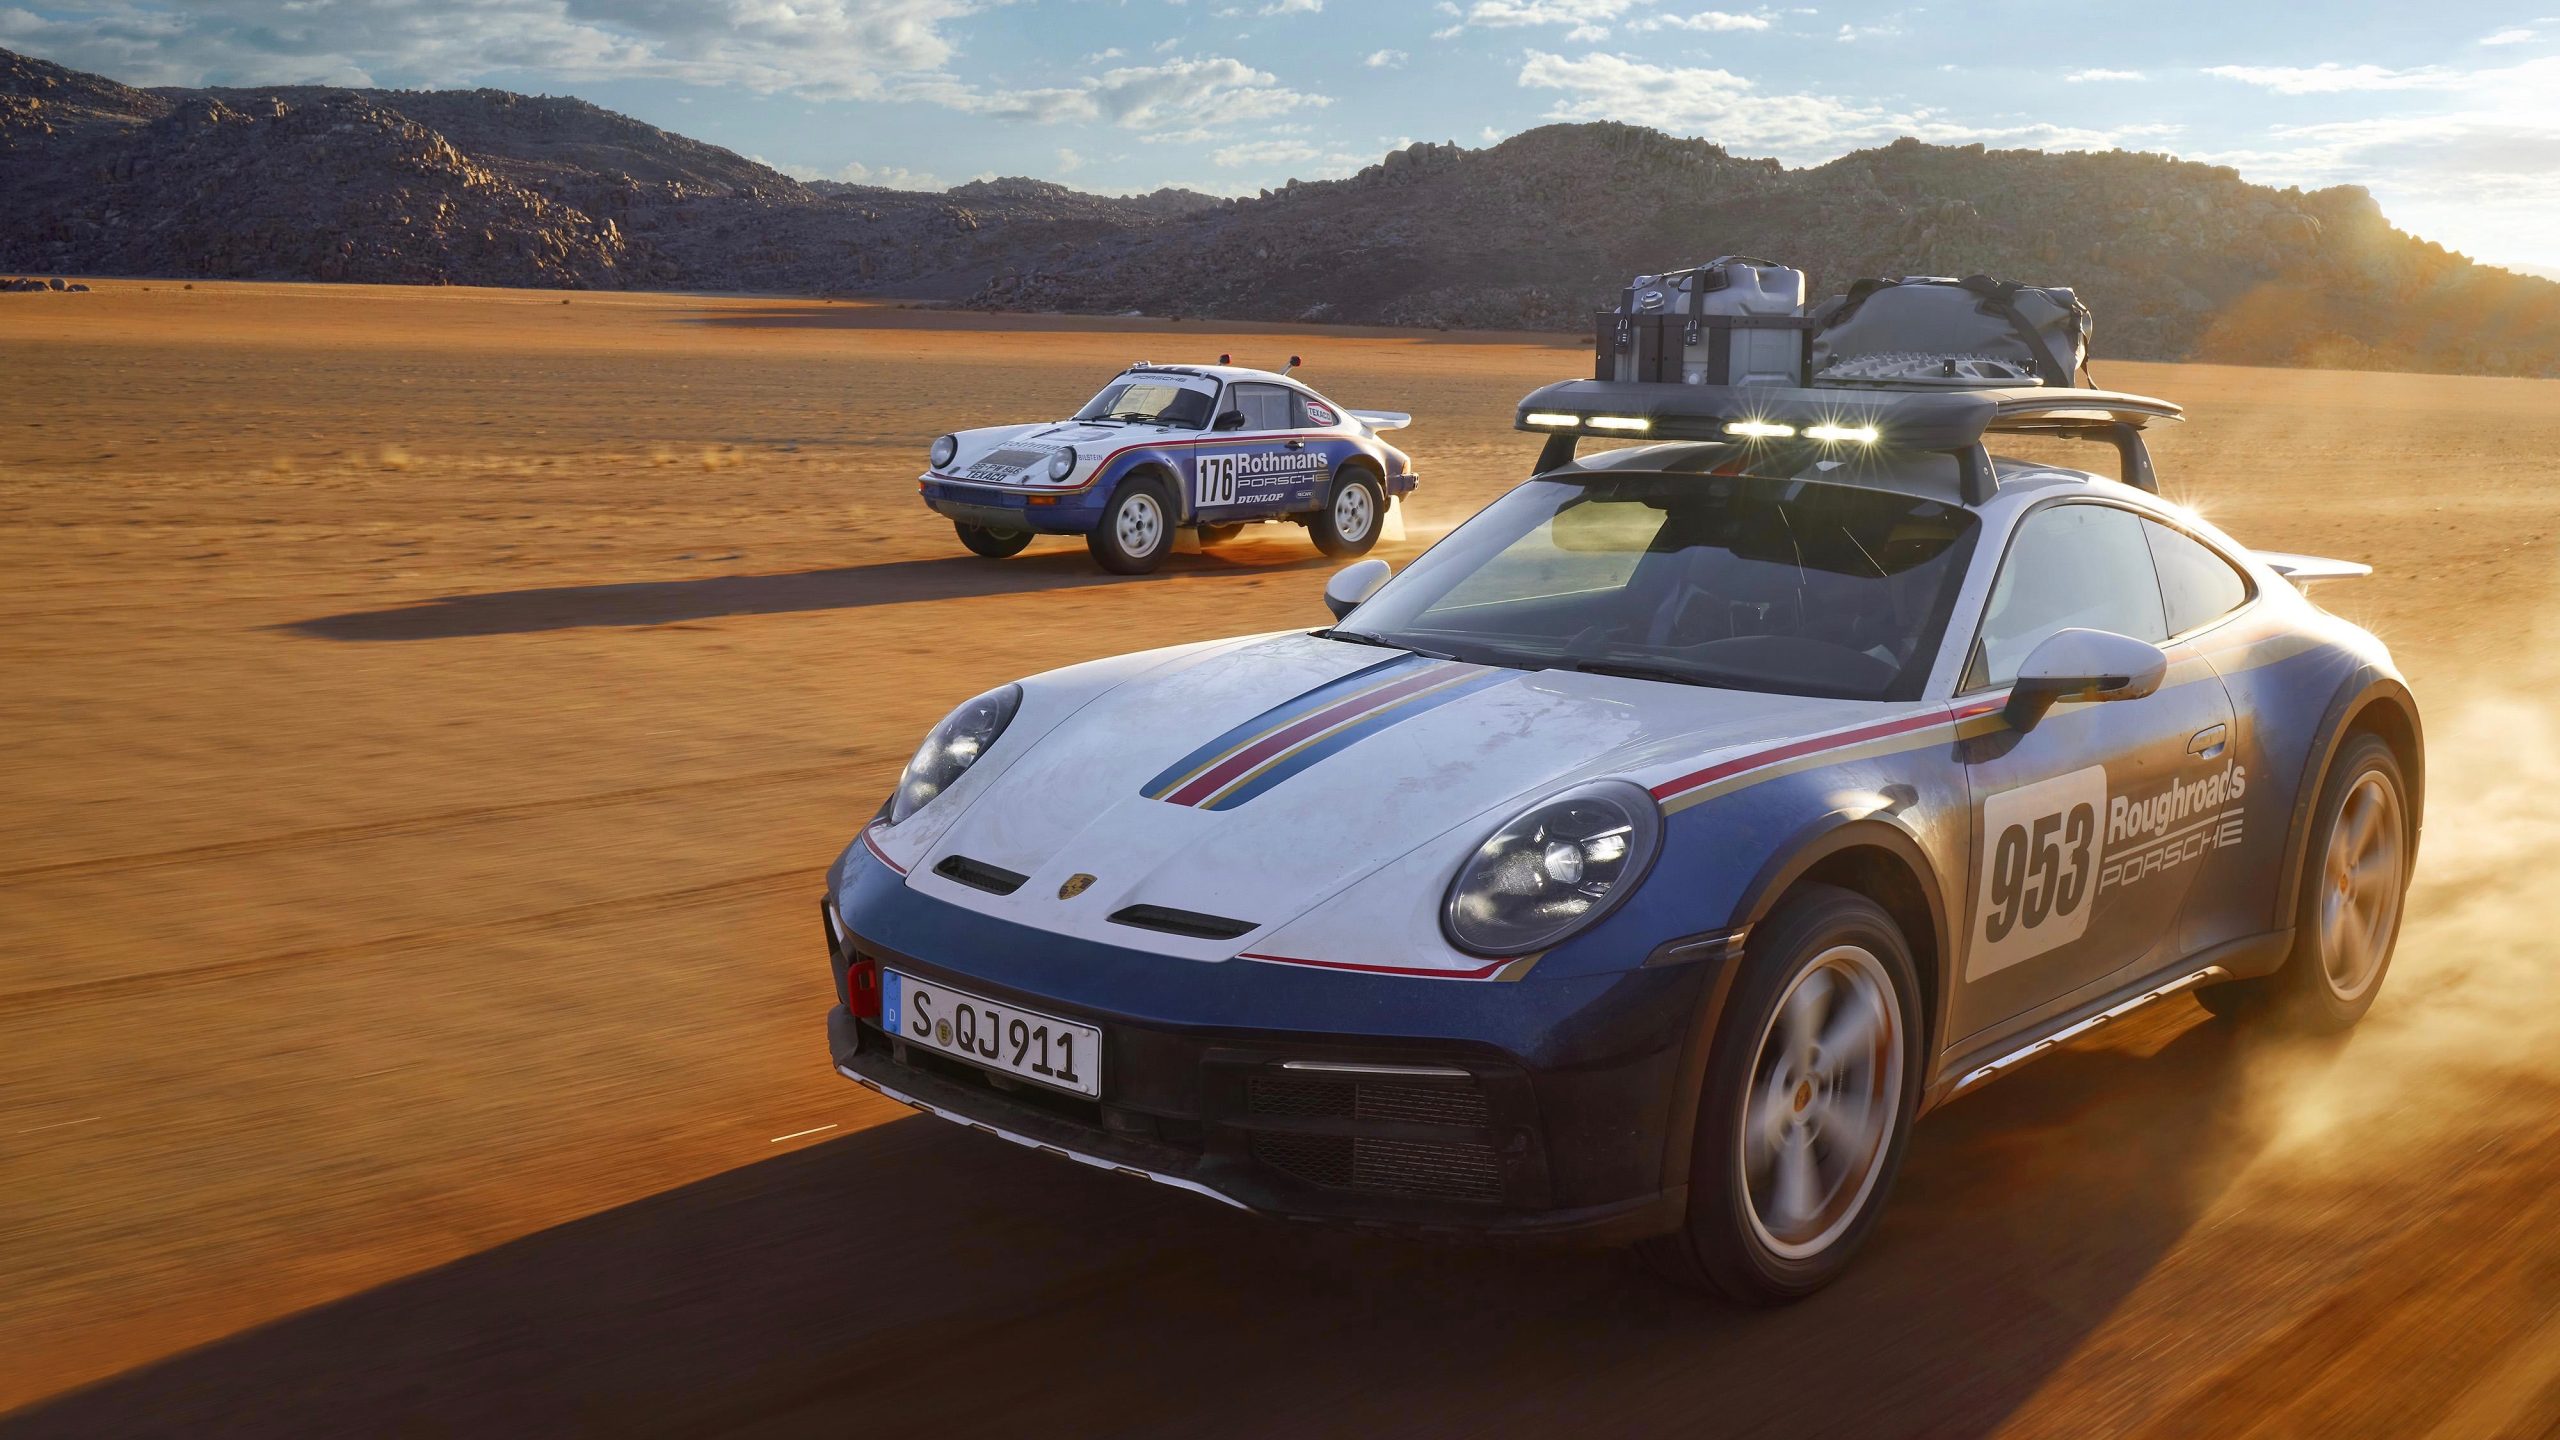 2023 Type 992 Porsche 911 Dakar with a 1984 Type 953 911 Carrera 4x4 RS Rallye in the background